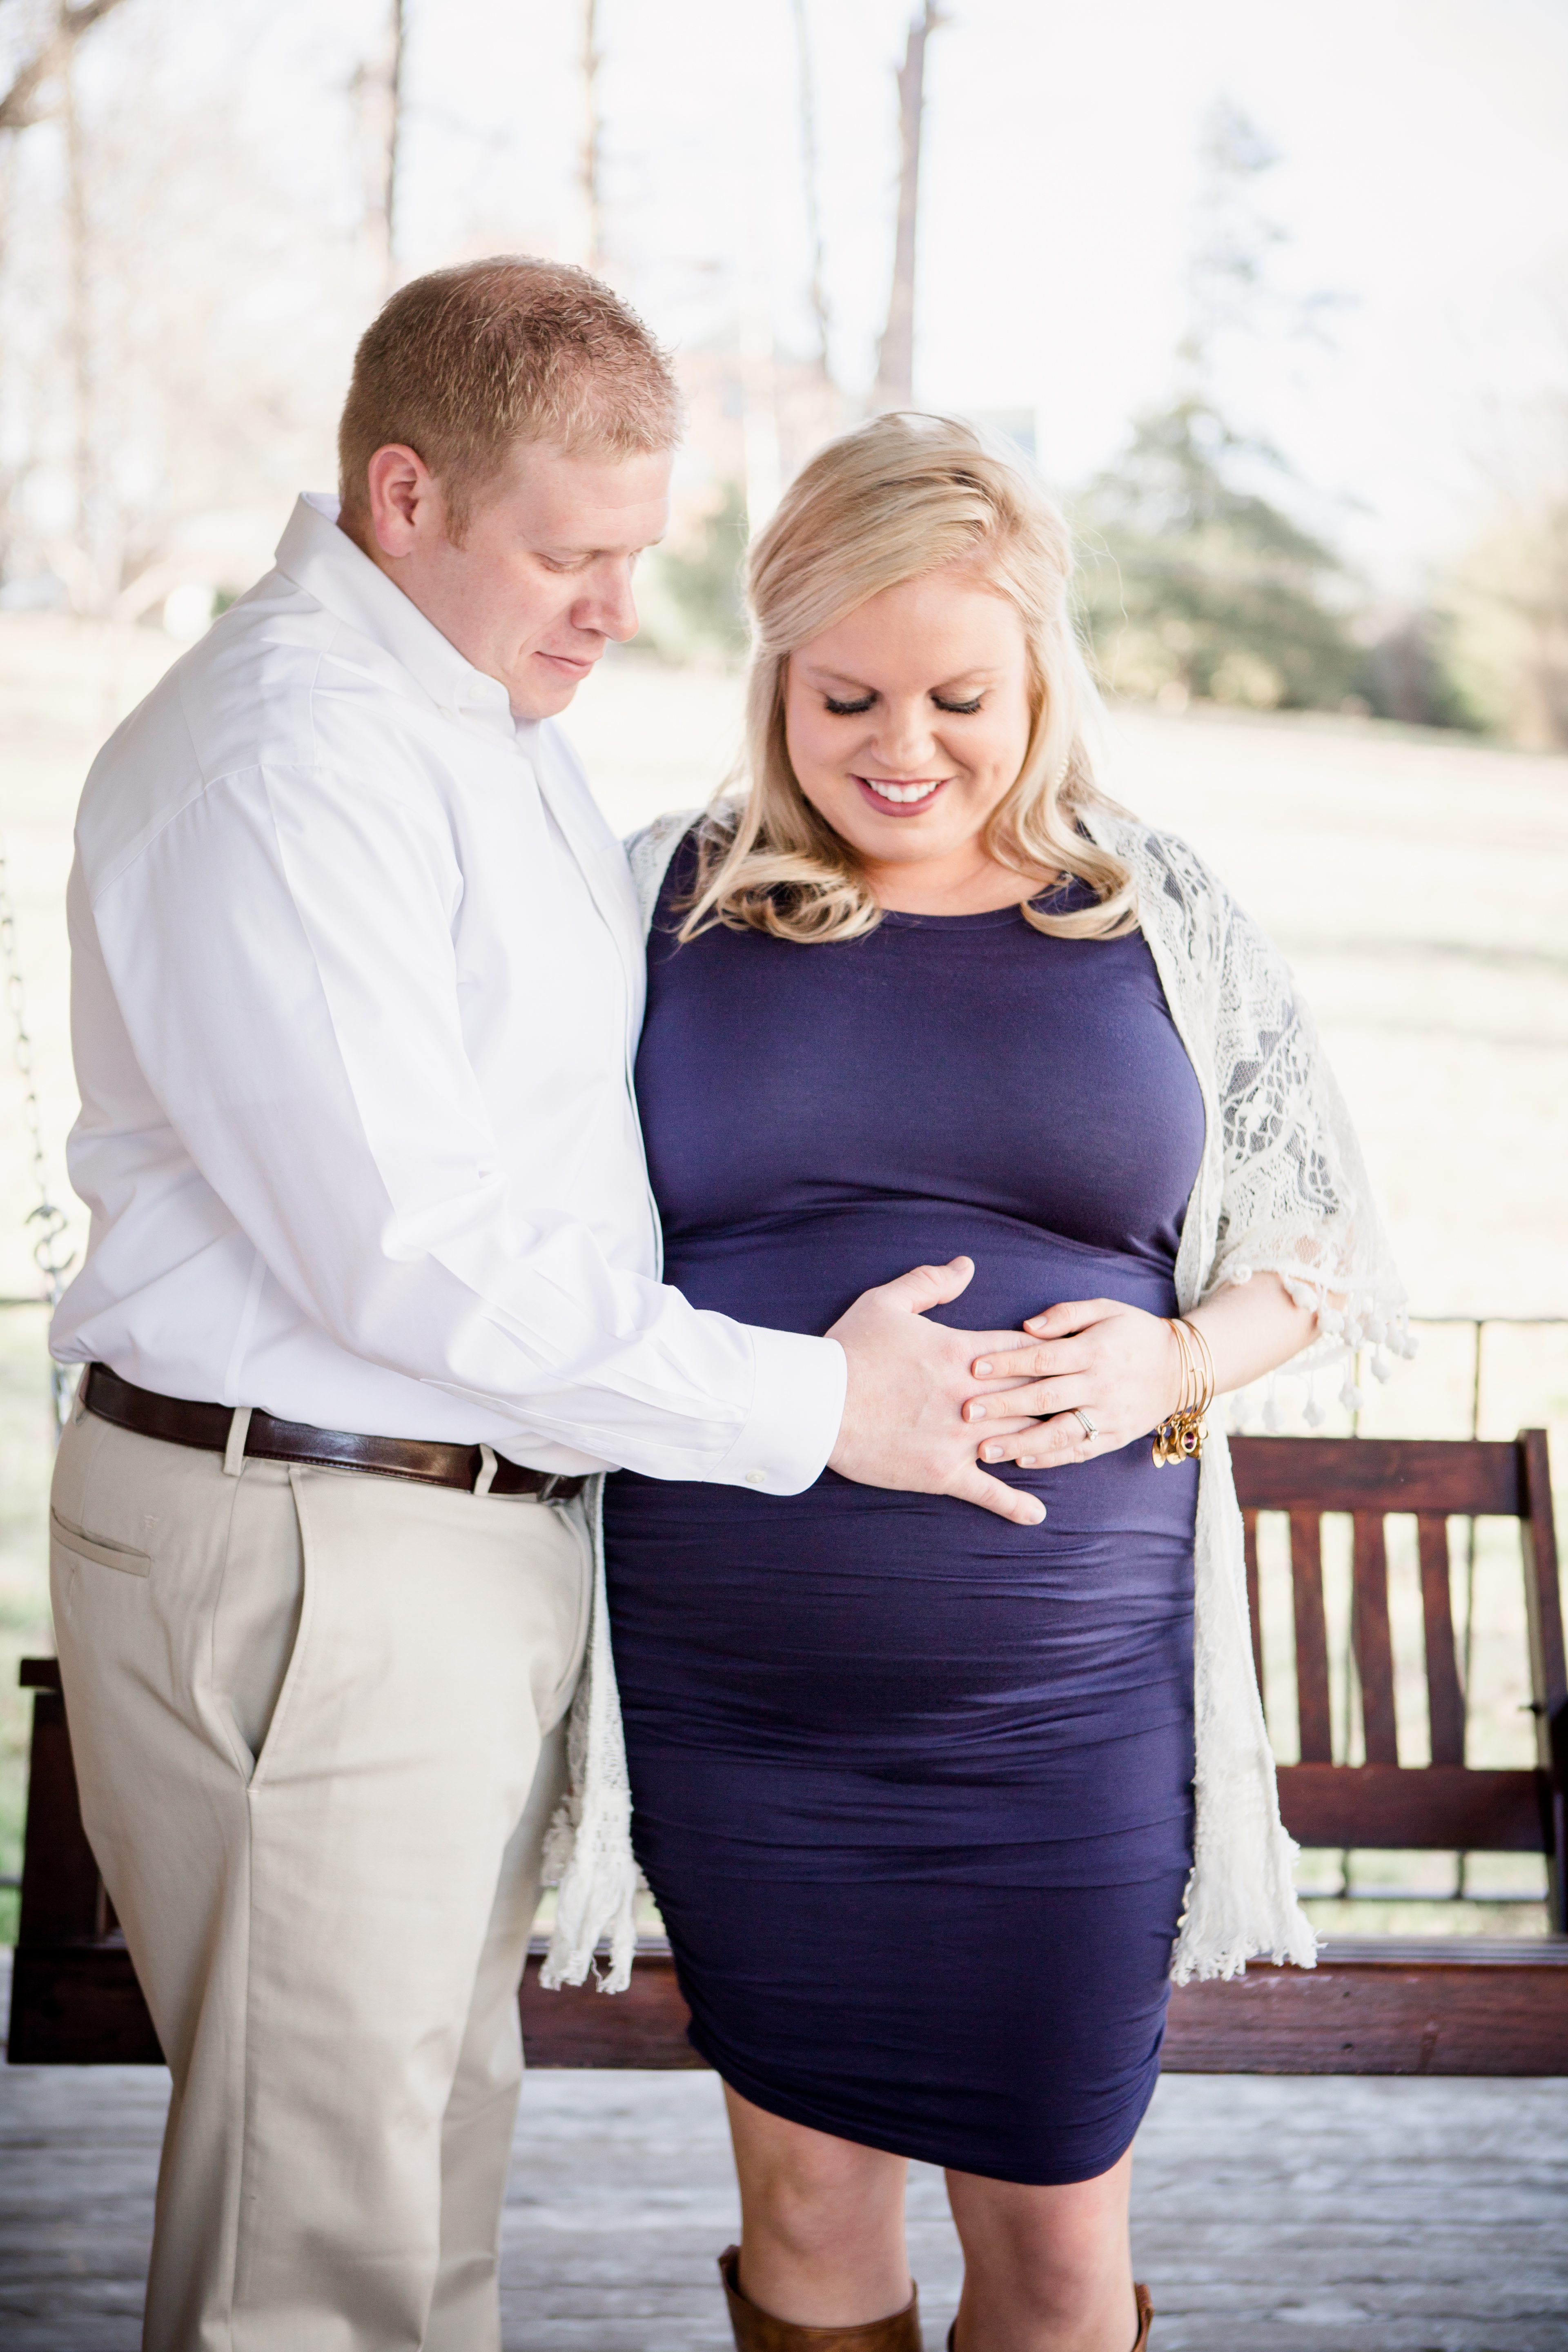 Feeling the baby by Knoxville Wedding Photographer, Amanda May Photos.